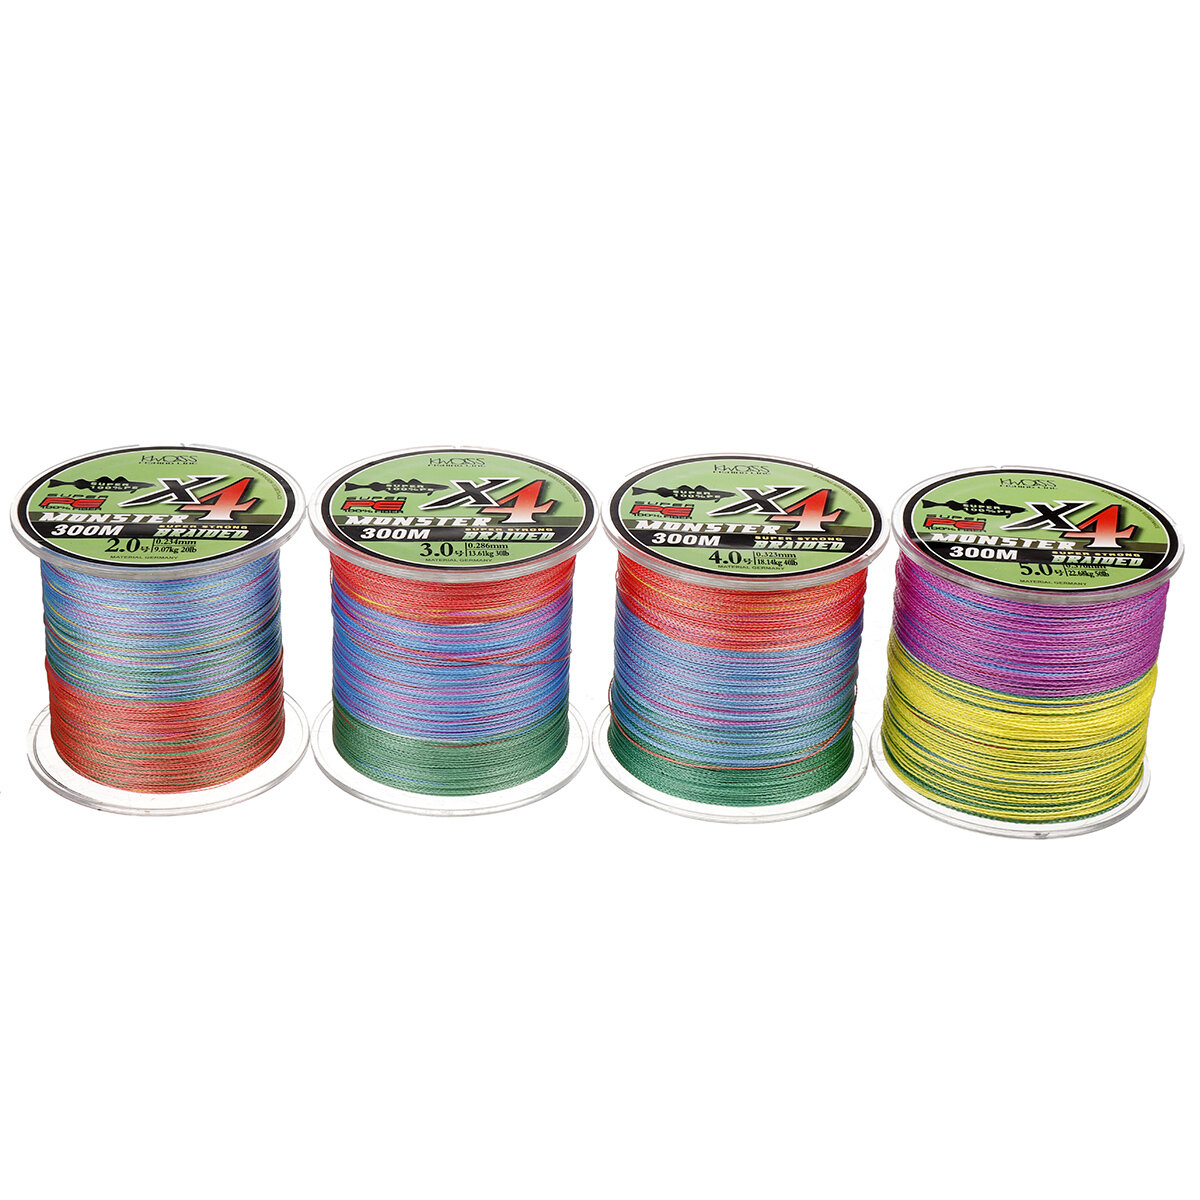 300m Fishing Line Ultra Strong Braided 20/30/40/50lb PE Line Fishing Tackle